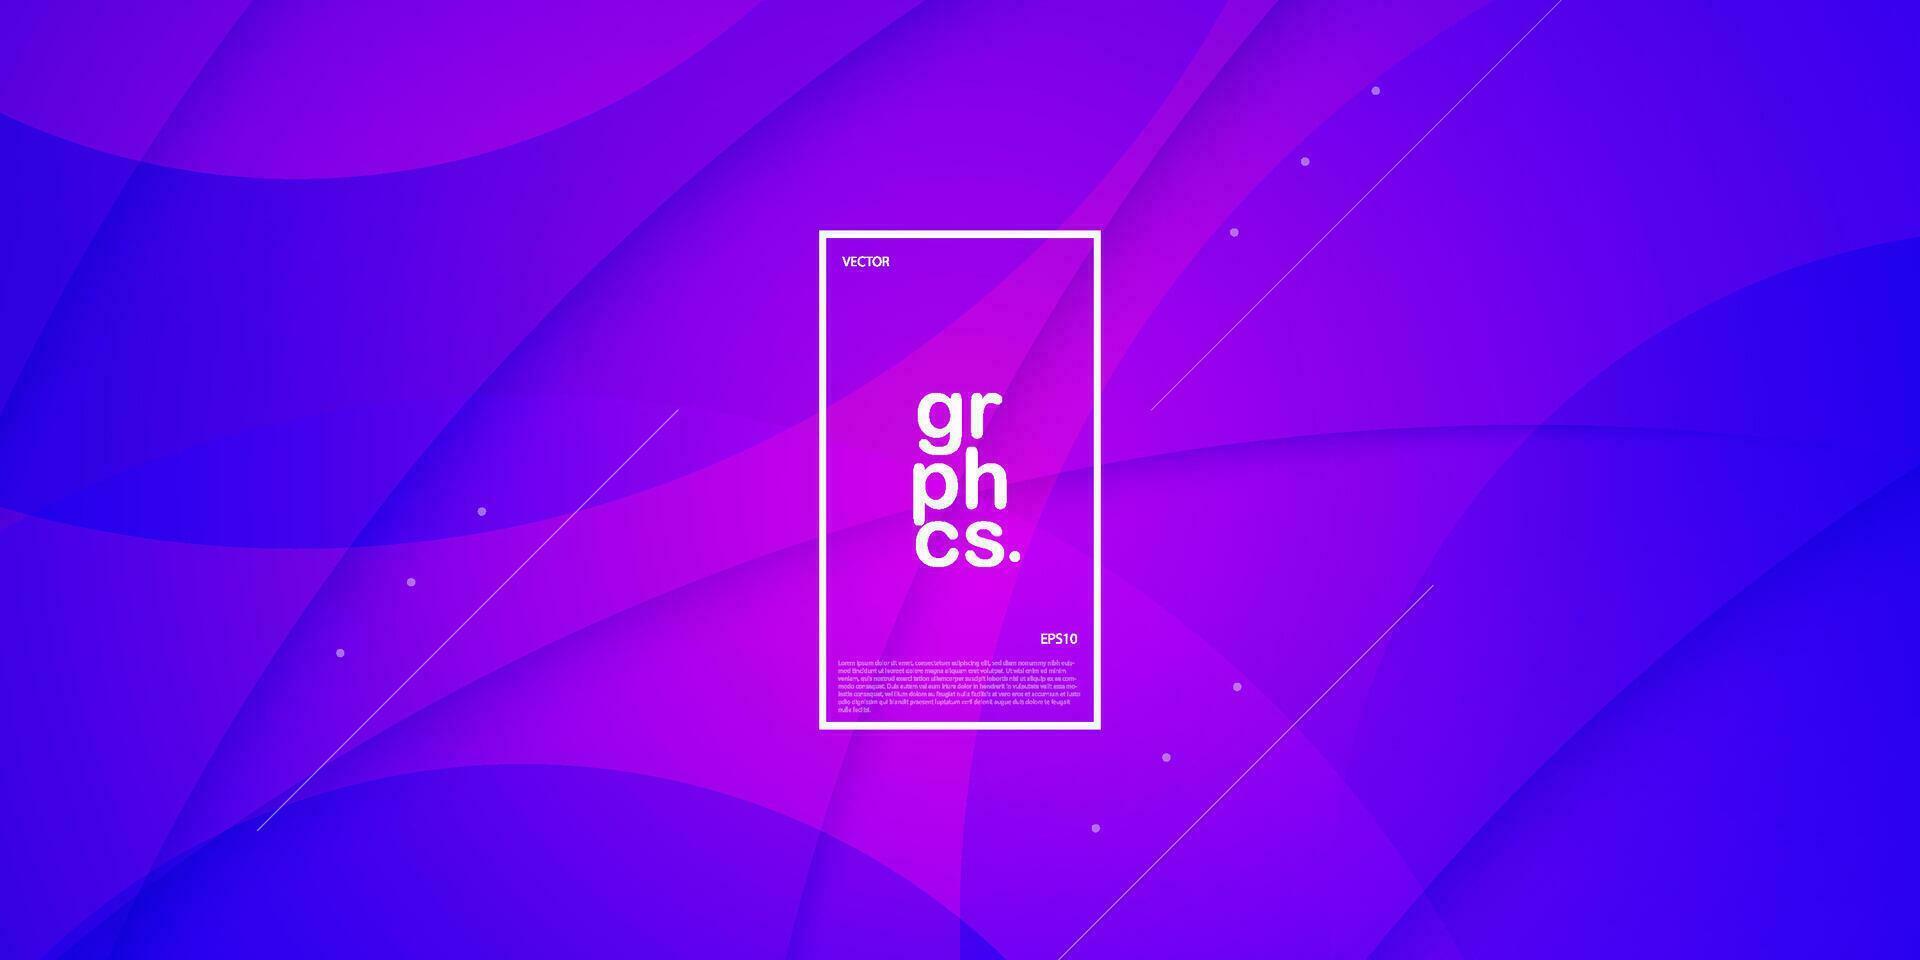 Dark purple gradient illustration dynamic background with 3d simple pattern. Cool design and luxury. Eps10 vector